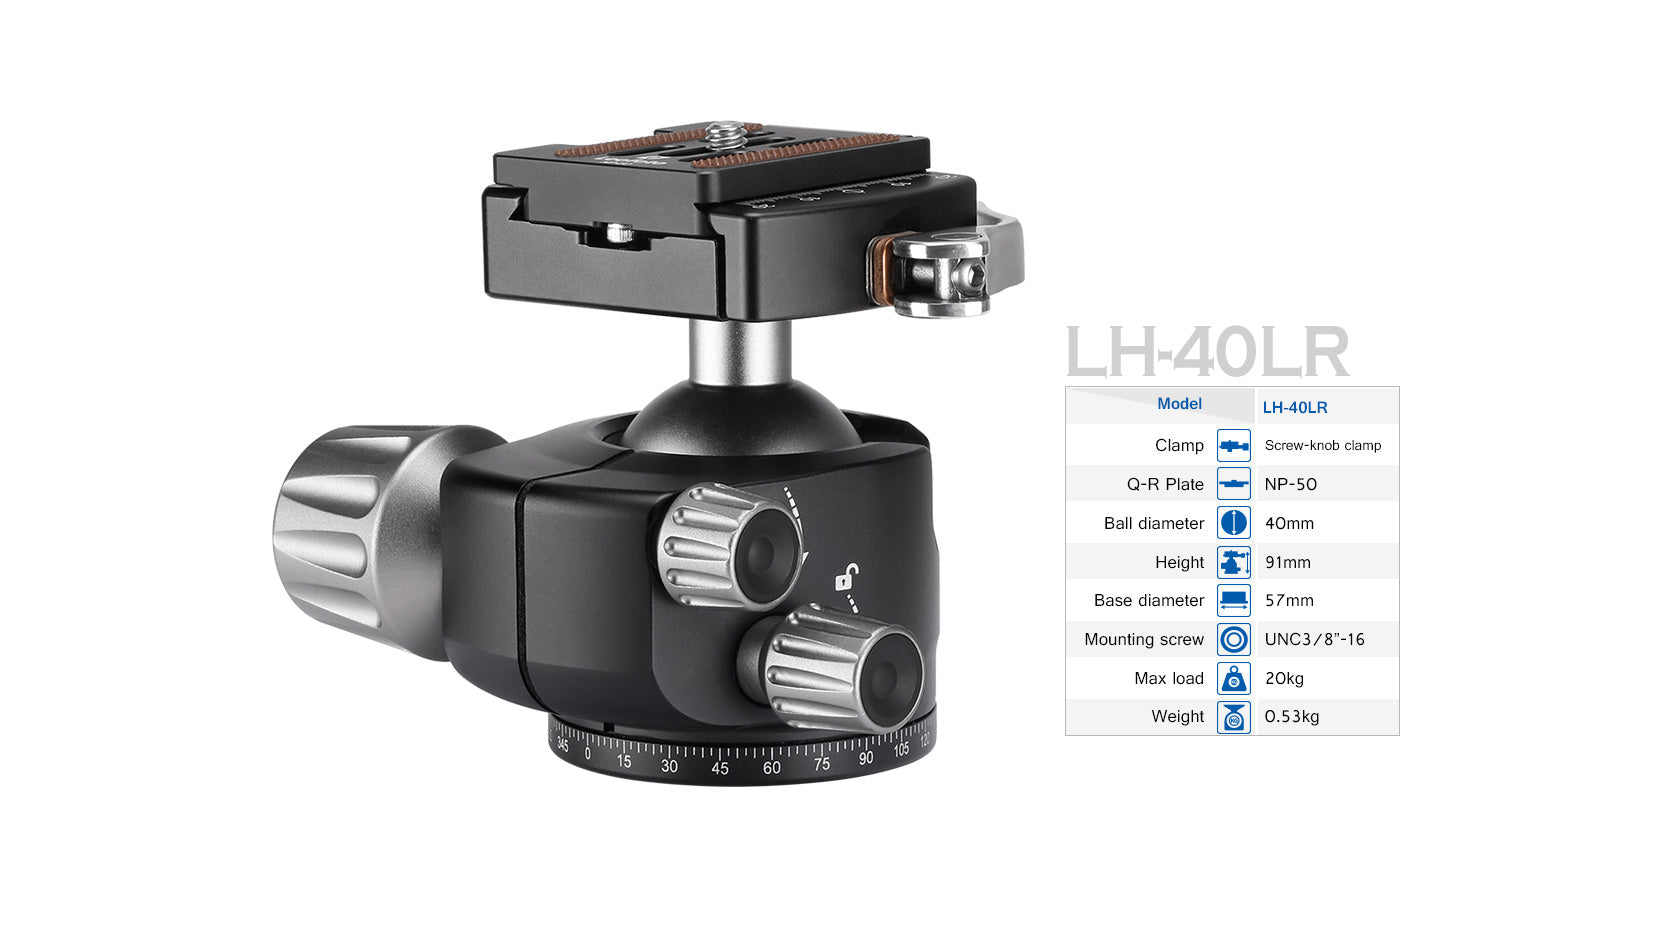 “Open Box" Leofoto LH-40LR Ball Head with LR-50 Lever Release Clamp | New, no bag